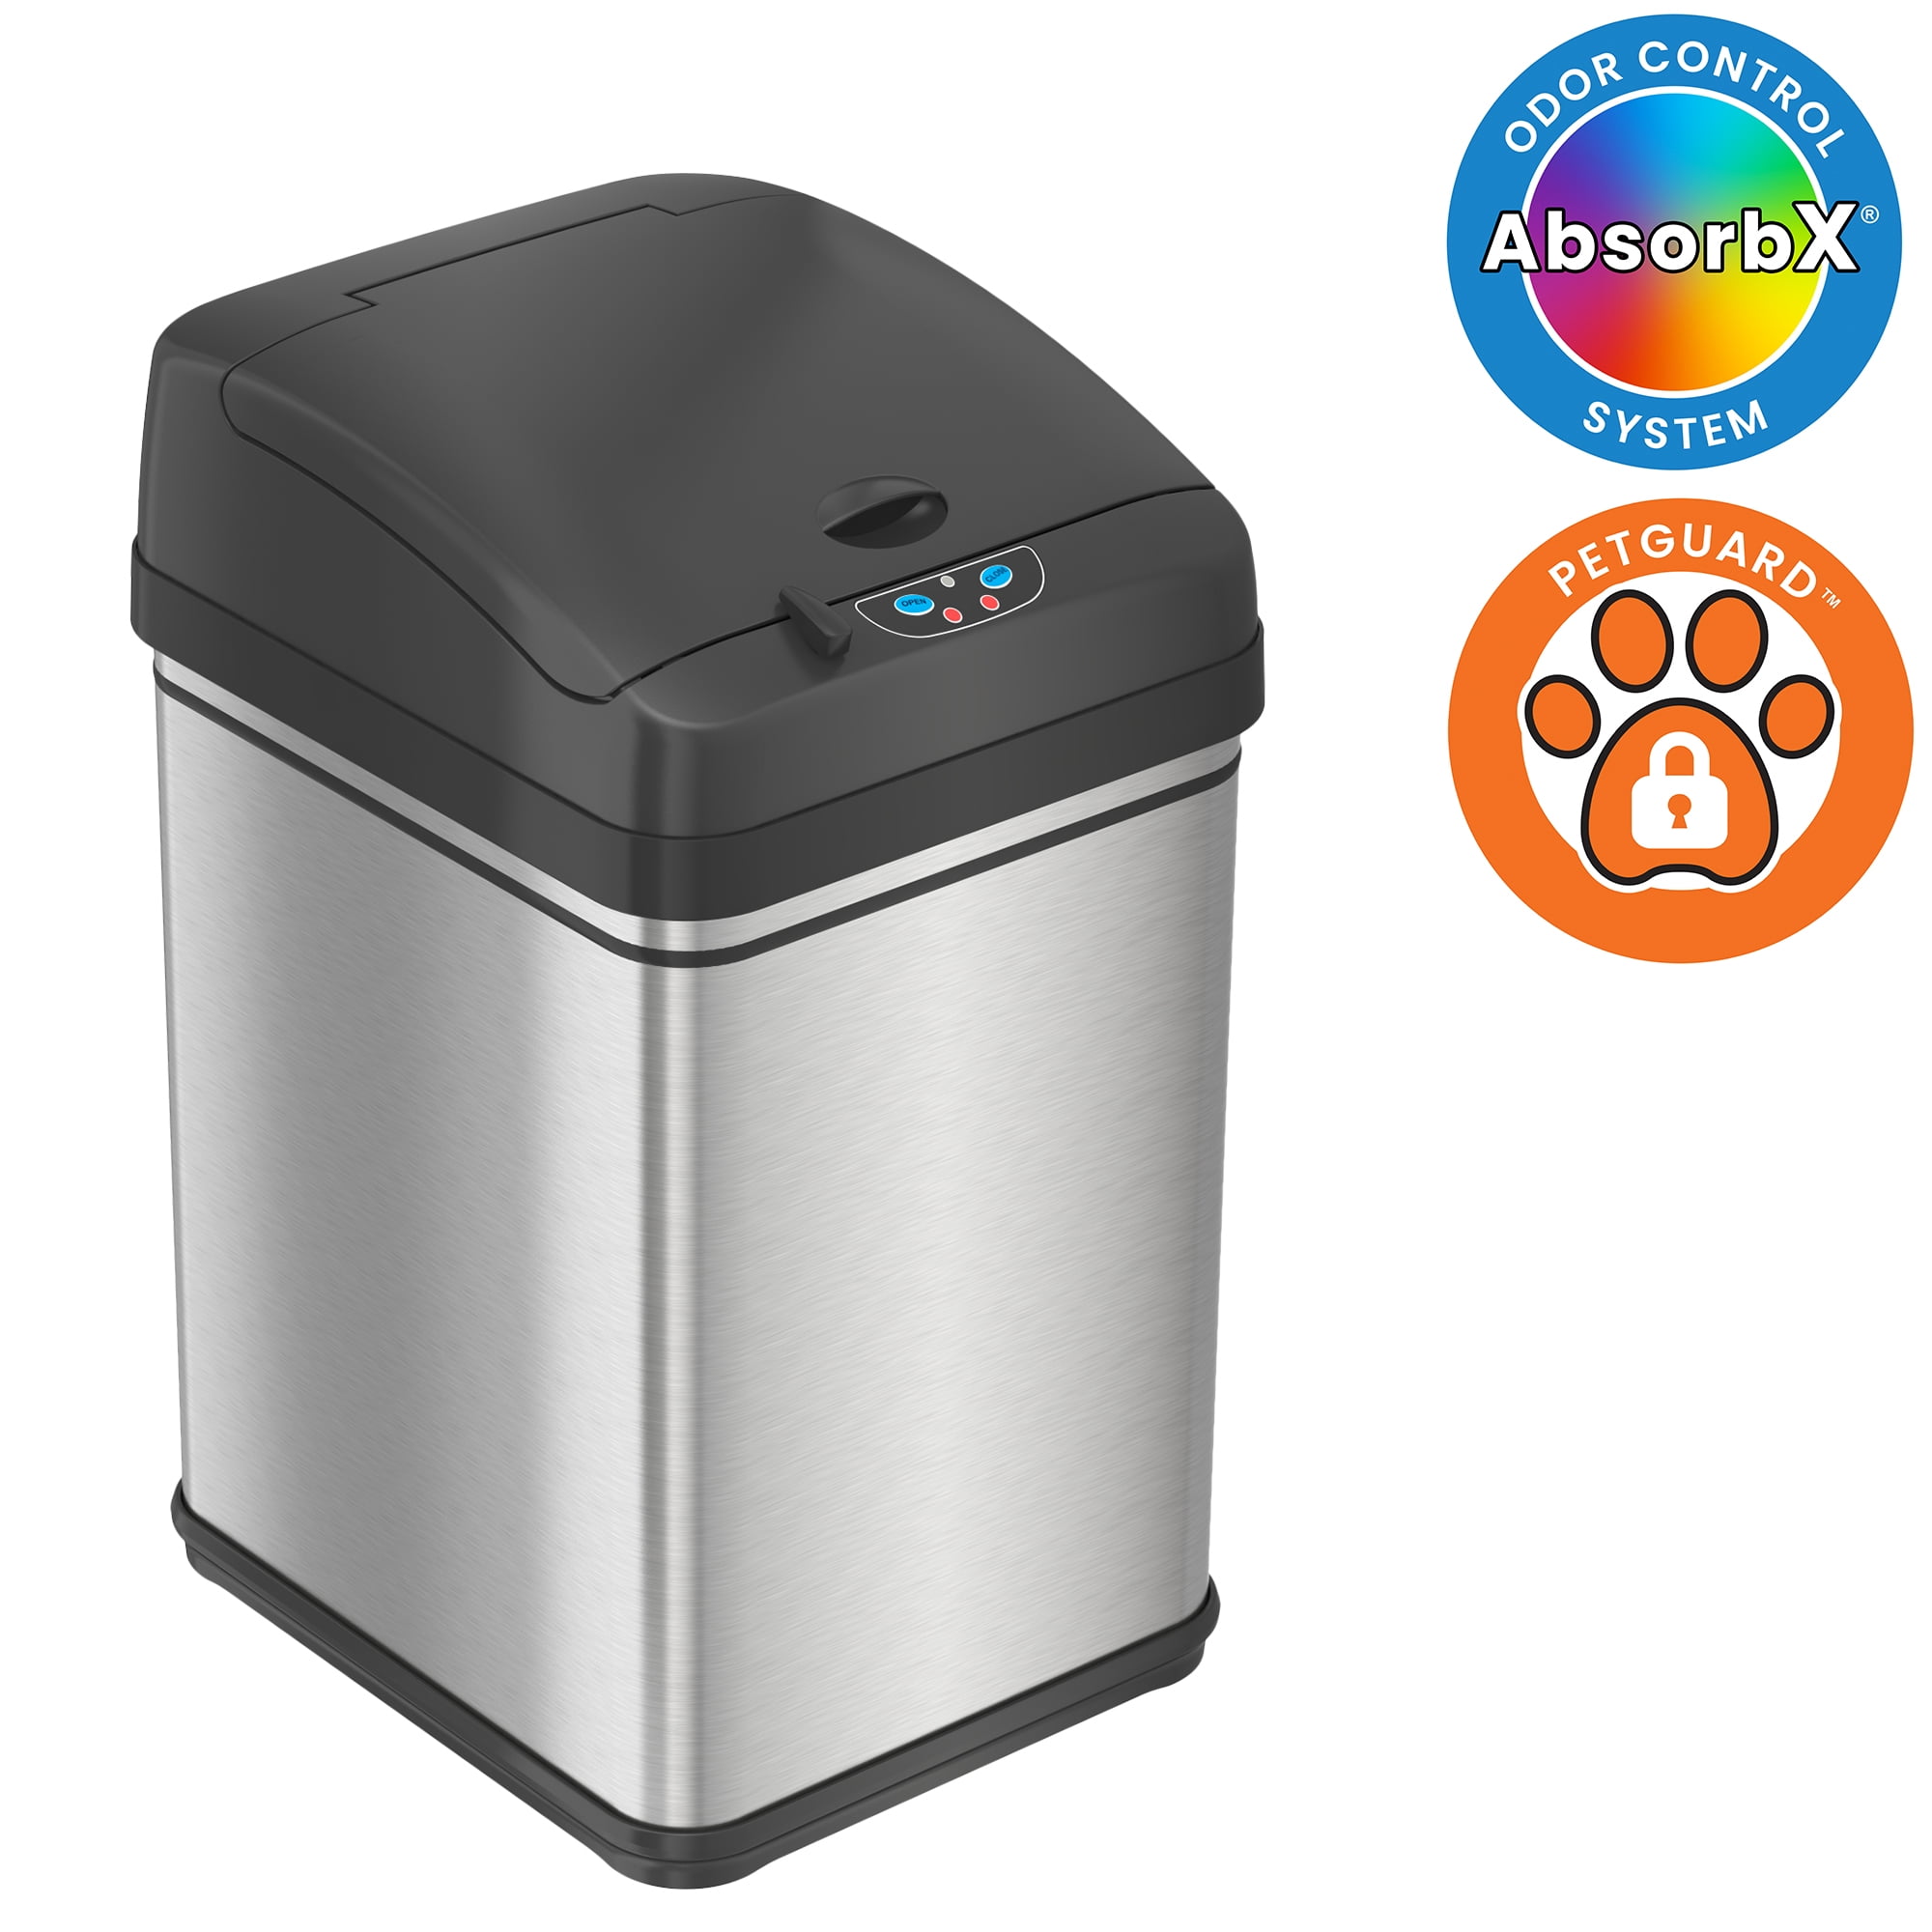 iTouchless 8 Gallon Touchless Sensor Kitchen Trash Can with Odor Control  System, Stainless Steel, Round Garbage Bin for Home or Office